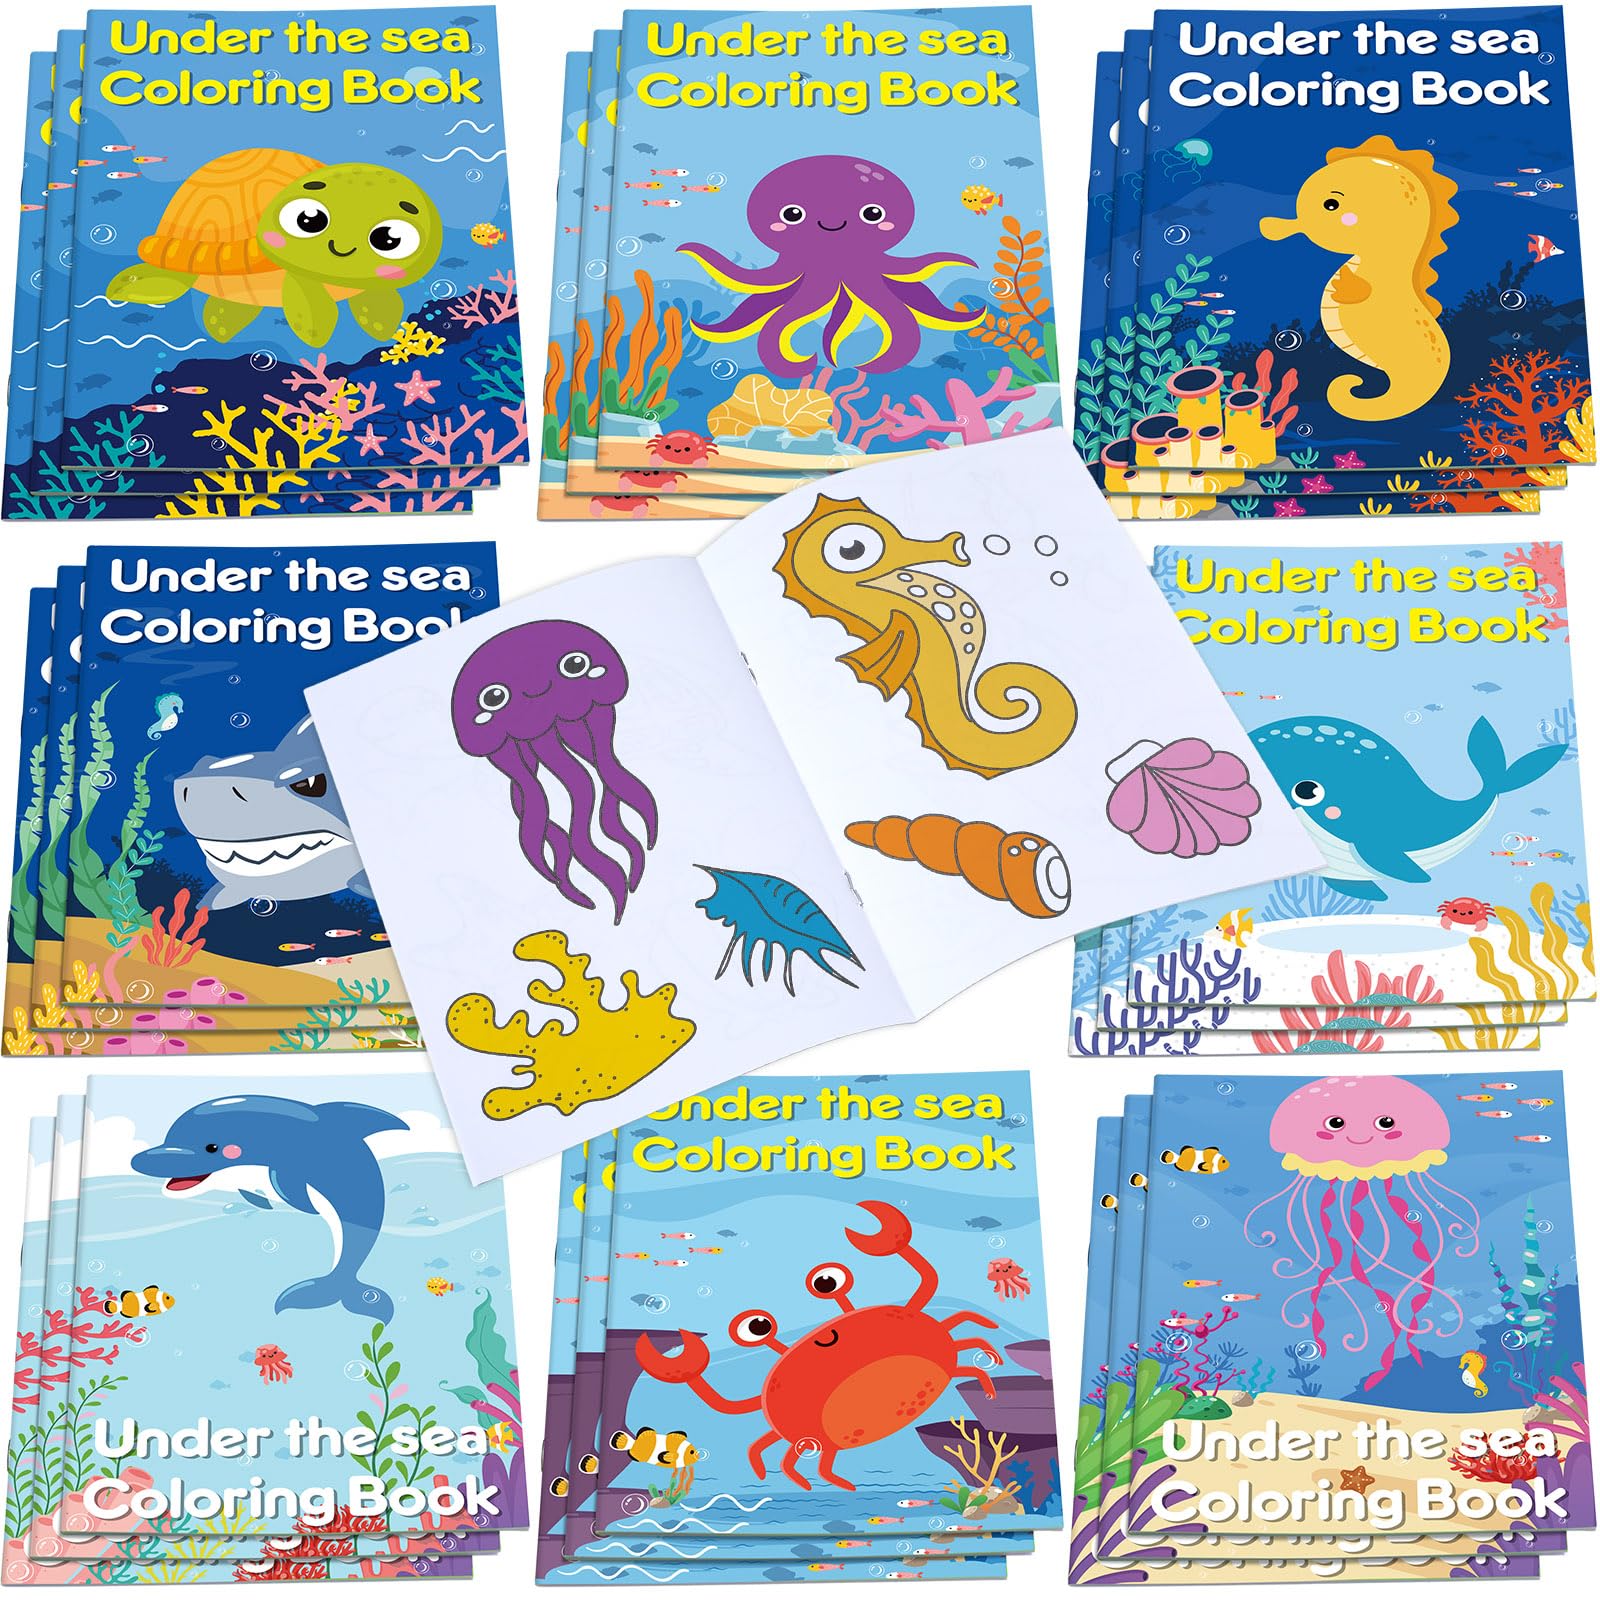 Faccito pcs ocean animals coloring books bulk under the sea mini coloring book party favors drawing book for kids ocean fish mermaid birthday party goodie bag gift classroom activity supply